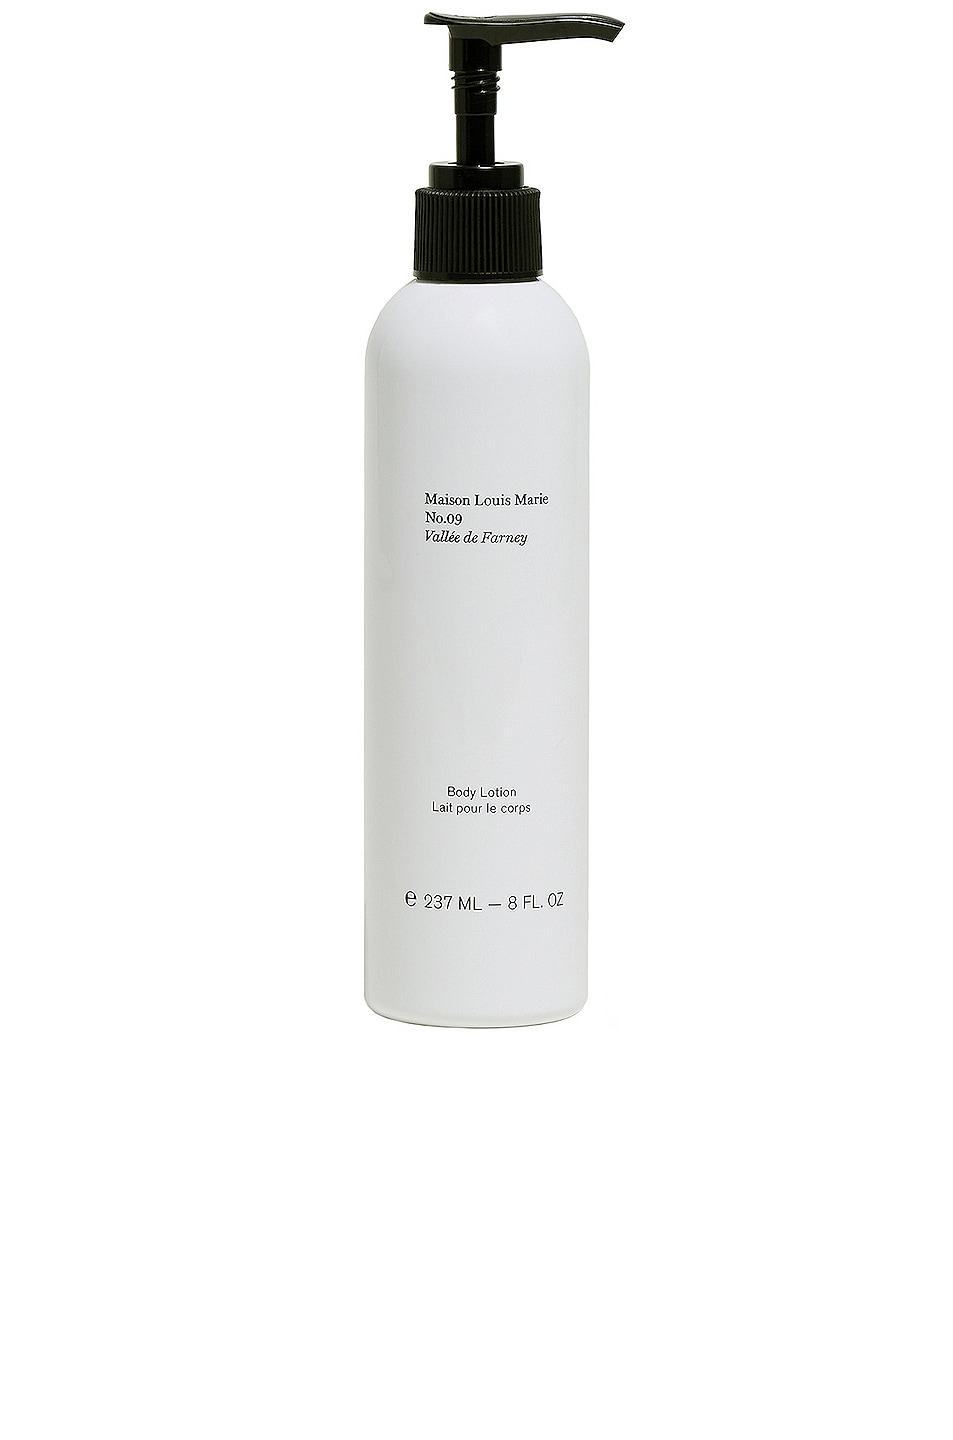 No.09 Vallee de Farney Body and Hand Lotion in Beauty: NA